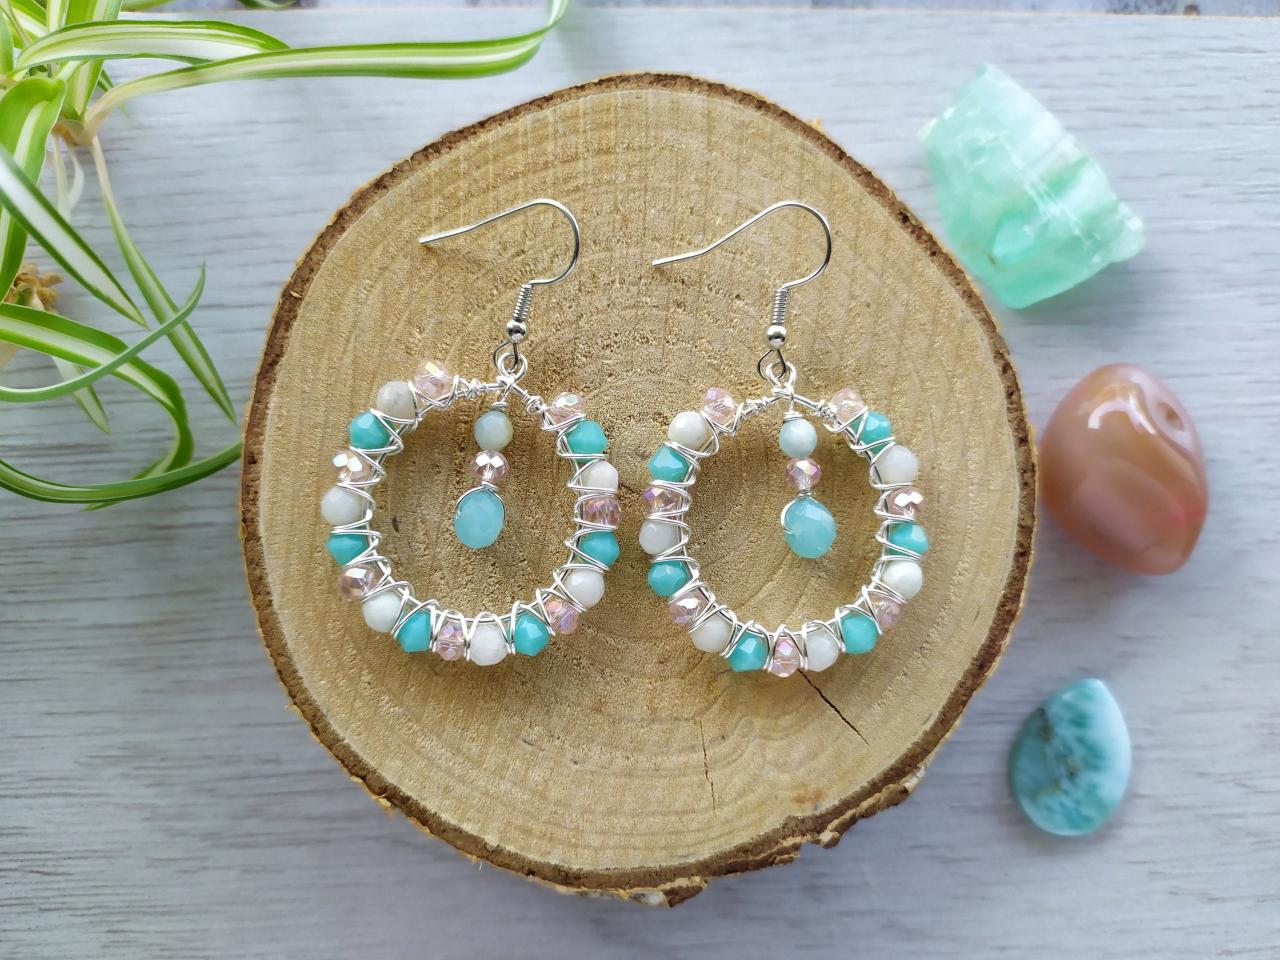 Pastel Pink Blue Hoop Earrings, Small Hoops With Amazonite And Glass Beads, Blue White Pink Boho Earrings, Wire Wrapped Hoops With Dangle